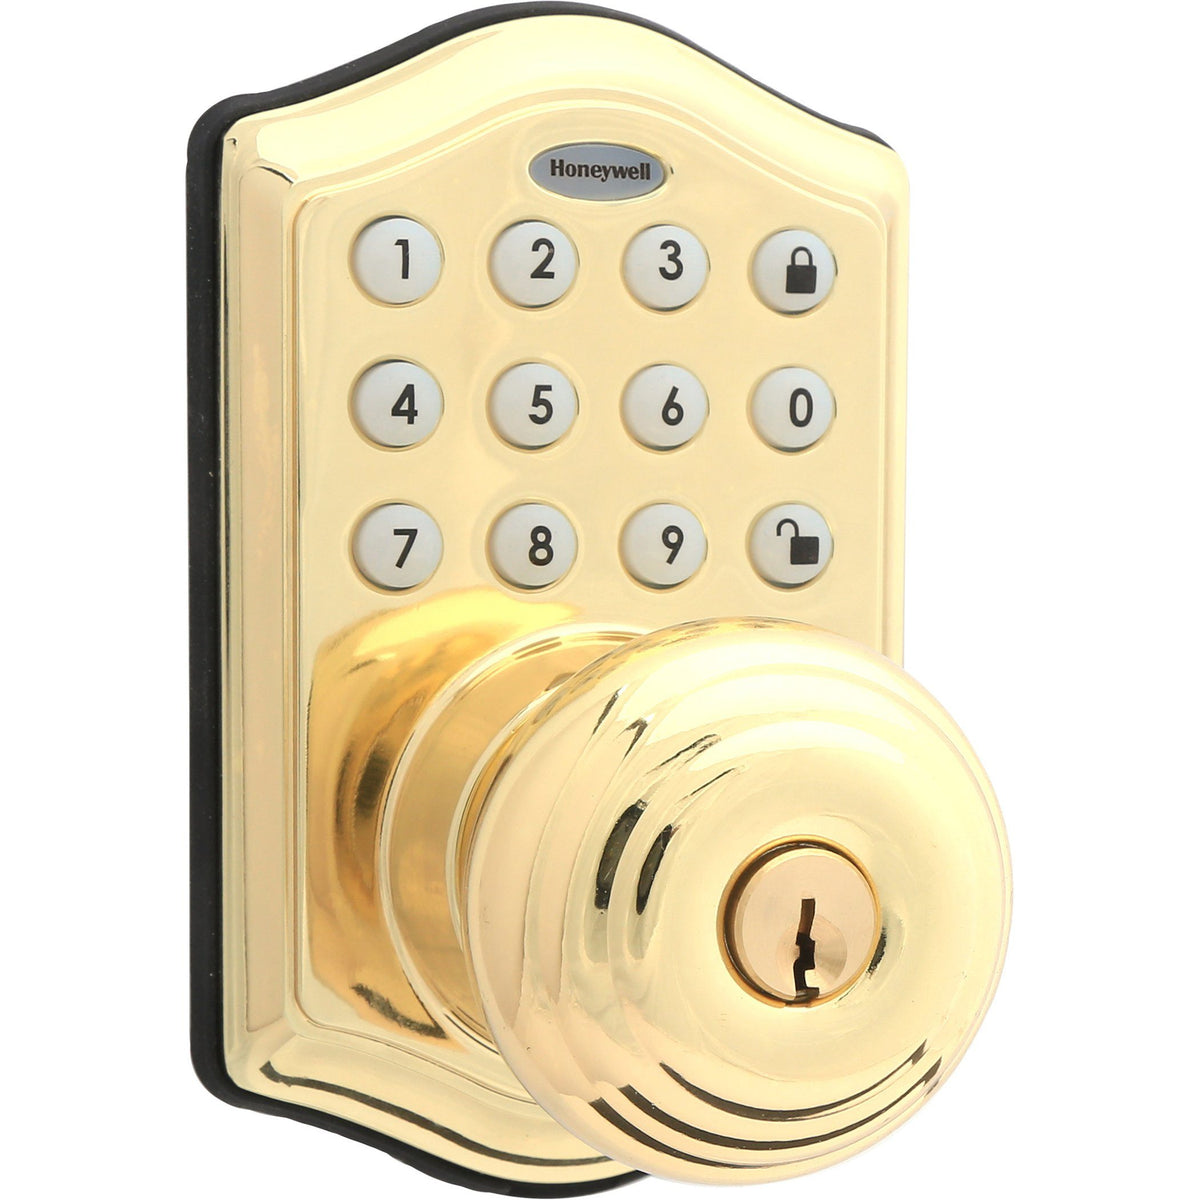 Honeywell 8732001 Electronic Entry Knob Door Lock with Keypad in Polished Brass